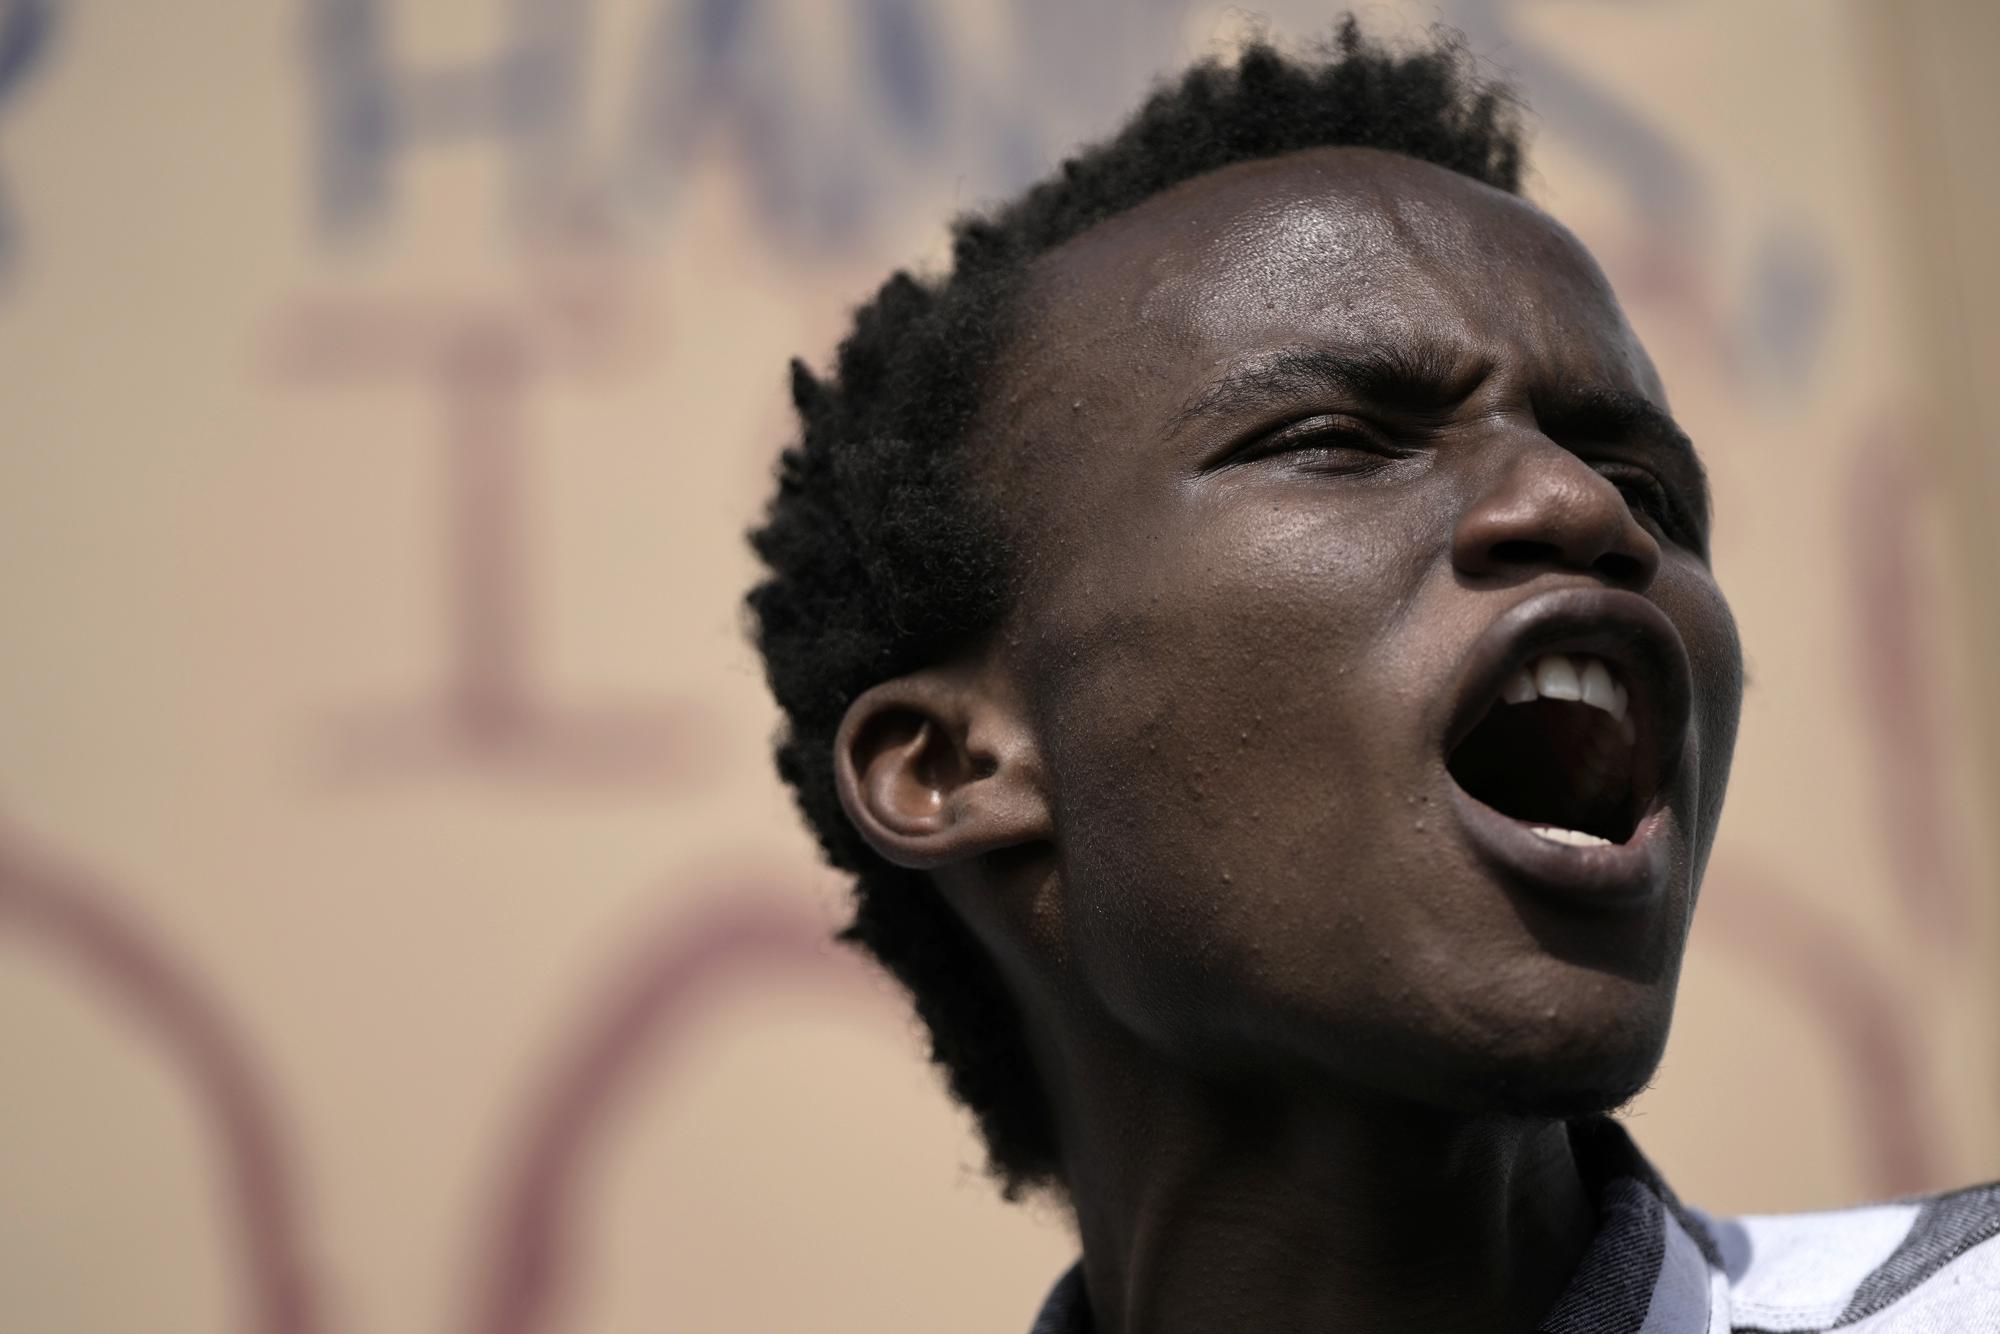 FILE - Youth climate activist Eric Njuguna, of Kenya, participates in a demonstration at the COP27 U.N. Climate Summit, Nov. 16, 2022, in Sharm el-Sheikh, Egypt. "I became a climate justice activist out of necessity," the 20-year-old says. "Having seen first-hand the impacts of the climate crisis, I joined the youth climate movement." (AP Photo/Nariman El-Mofty, File)